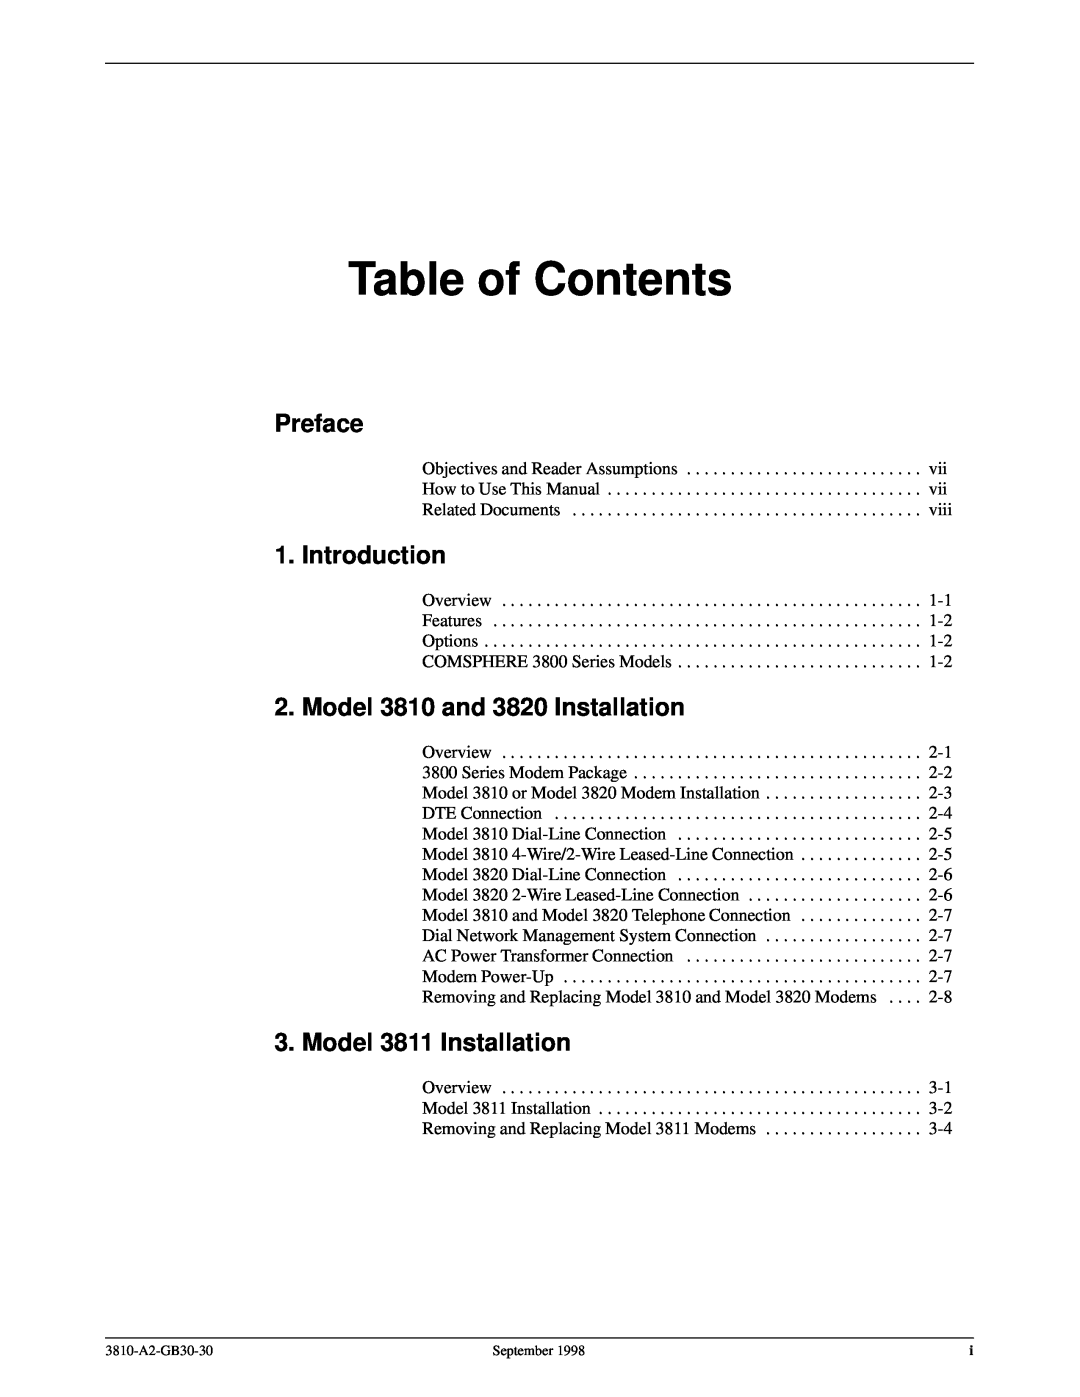 Paradyne 3800 manual Table of Contents, Preface, Introduction, Model 3810 and 3820 Installation, Model 3811 Installation 